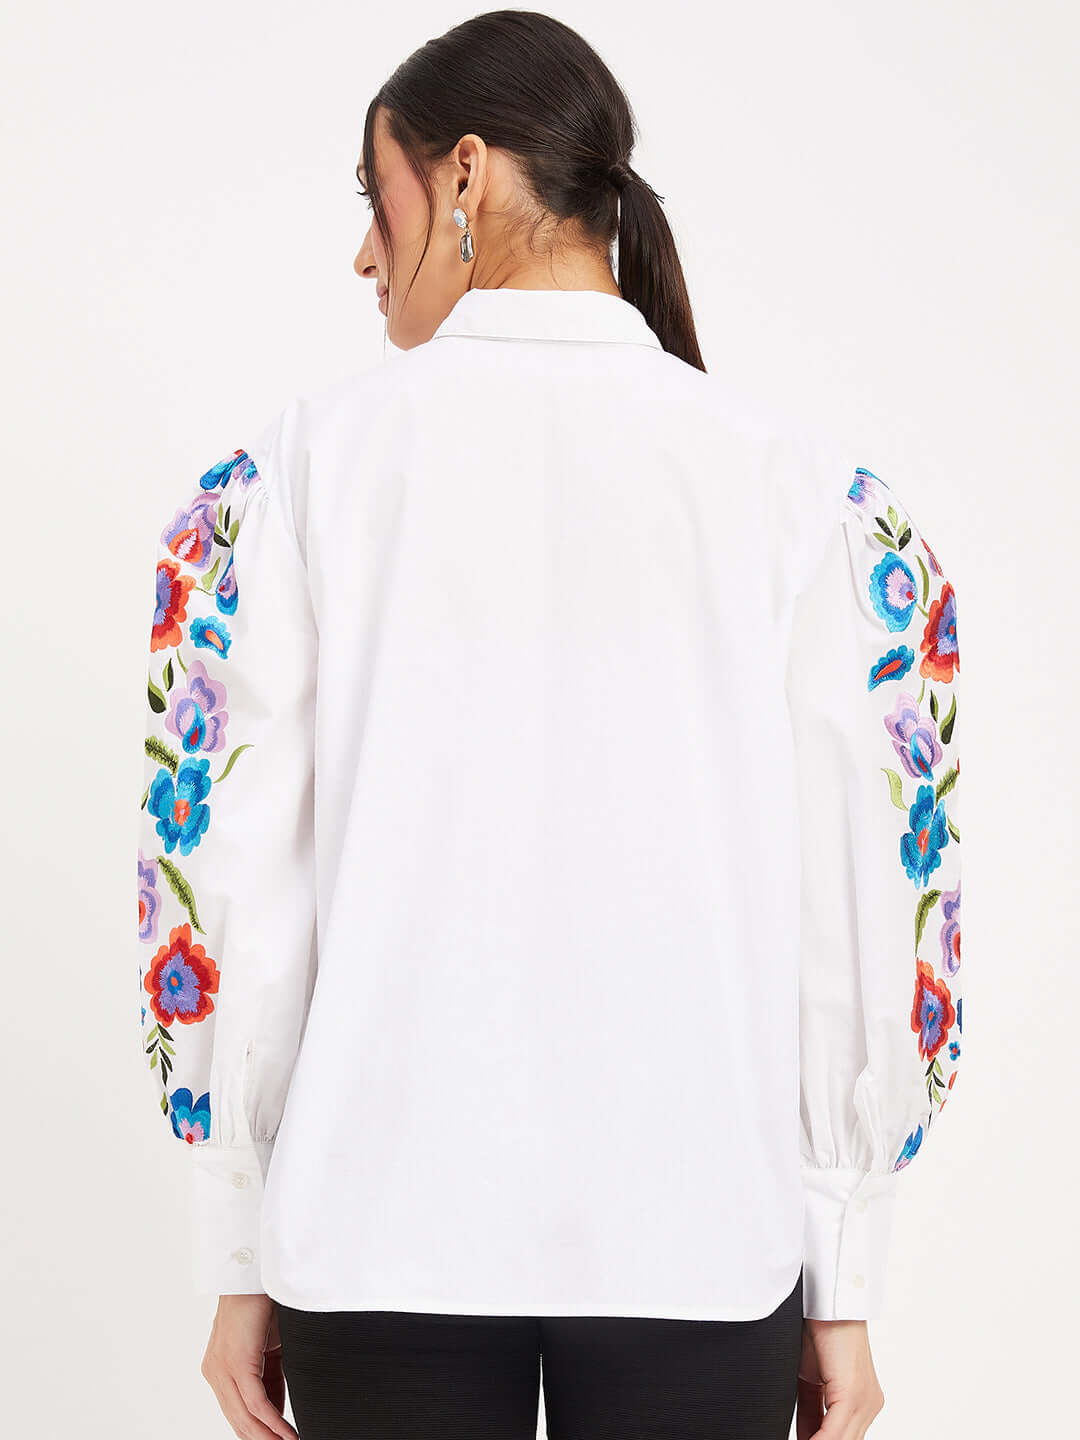 WHITE COTTON SHIRT WITH MULTI COLOURED FLORAL EMBROIDERY